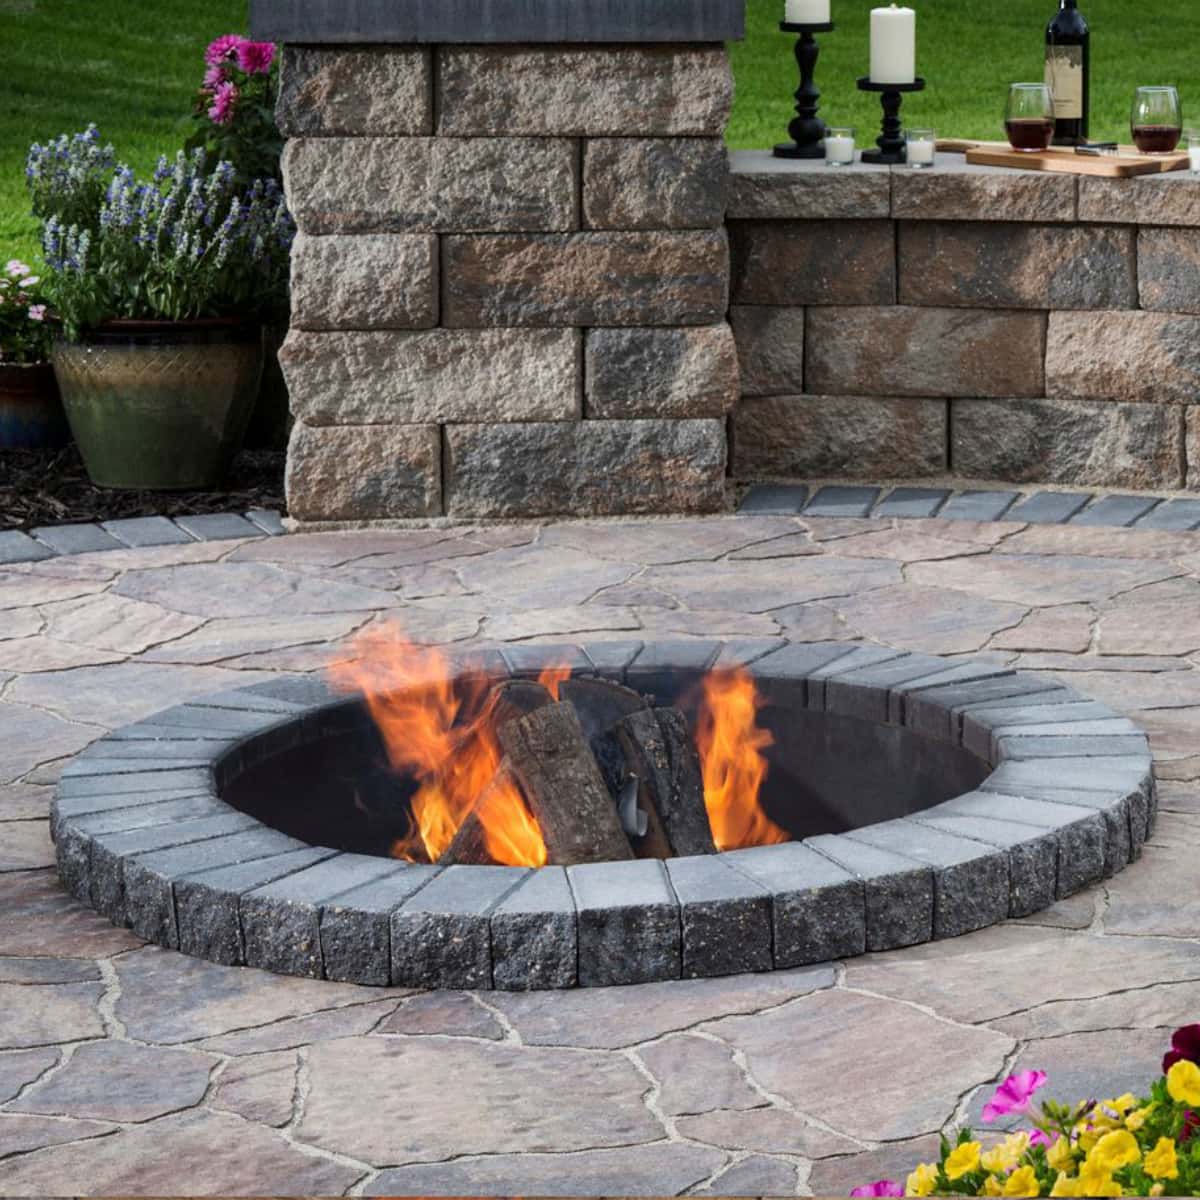 Are Backyard Fire Pits Legal Pit, How To Do Fire Pit